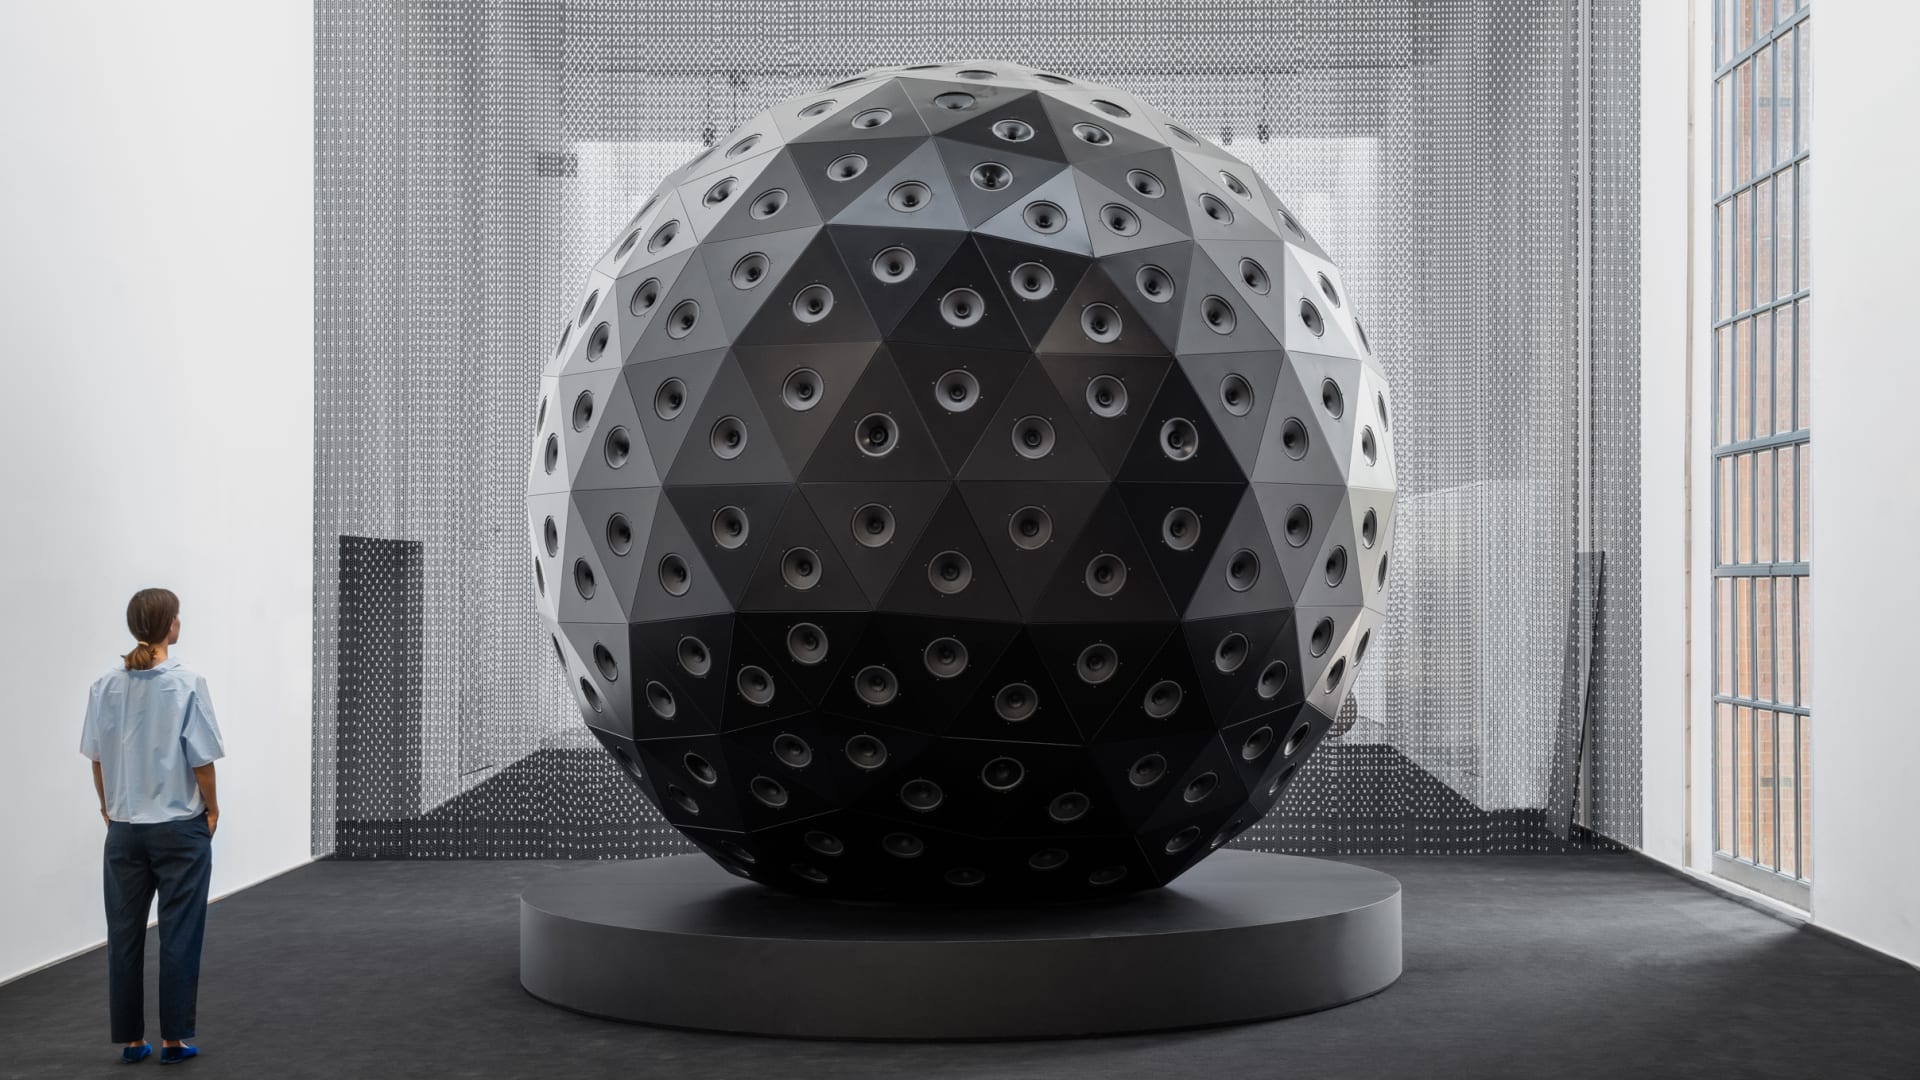 This sphere of 300 speakers blasts out an AI-created ‘soundtrack for the world’